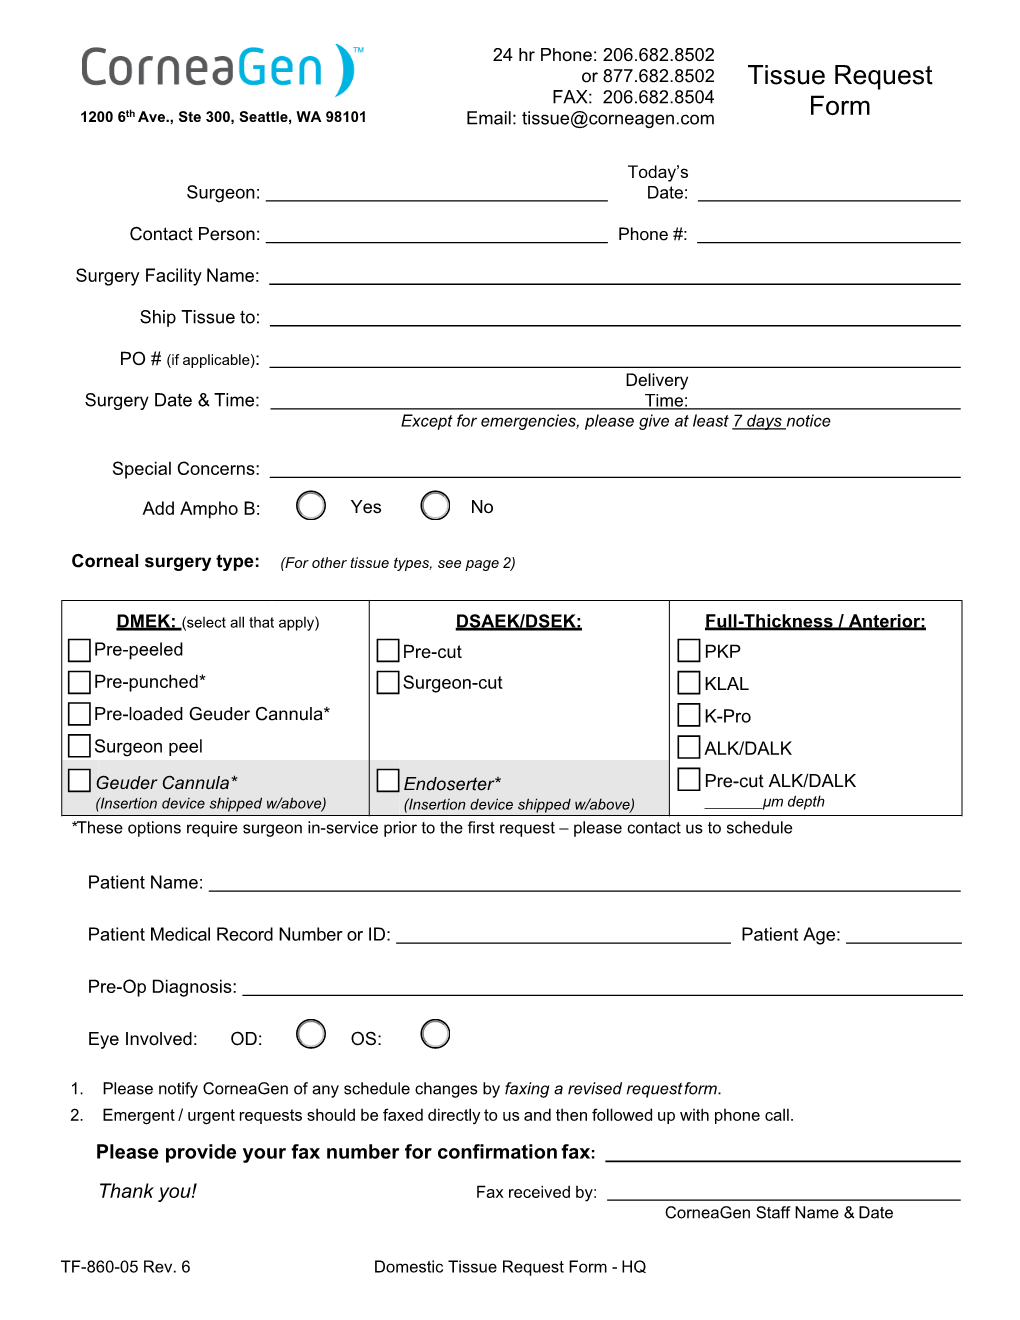 Tissue Request Form - HQ